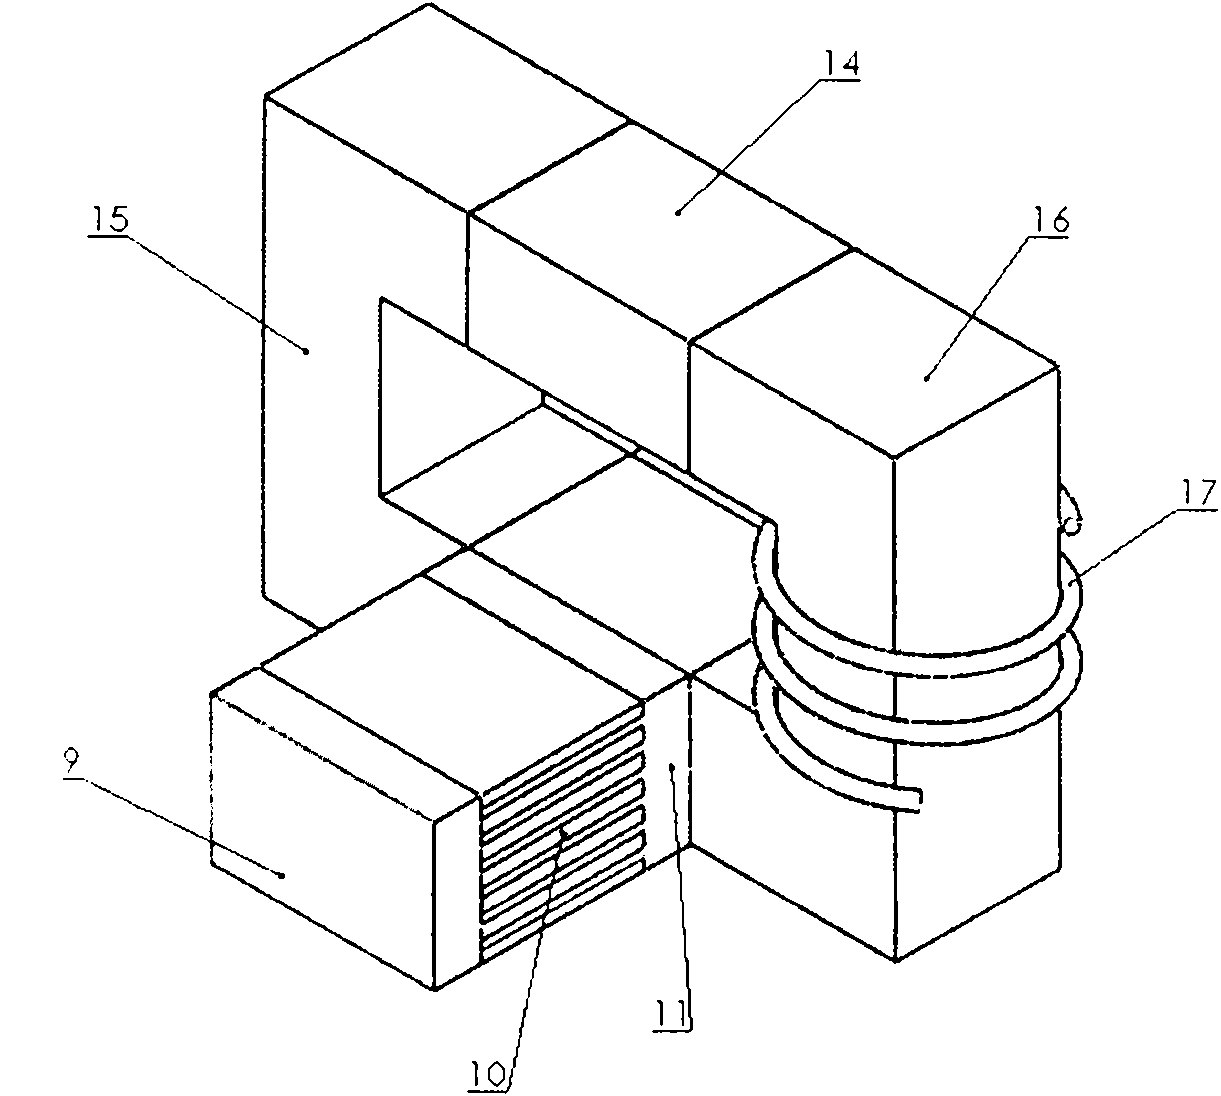 Thermoacoustic-drive thermomagnetic power generating system